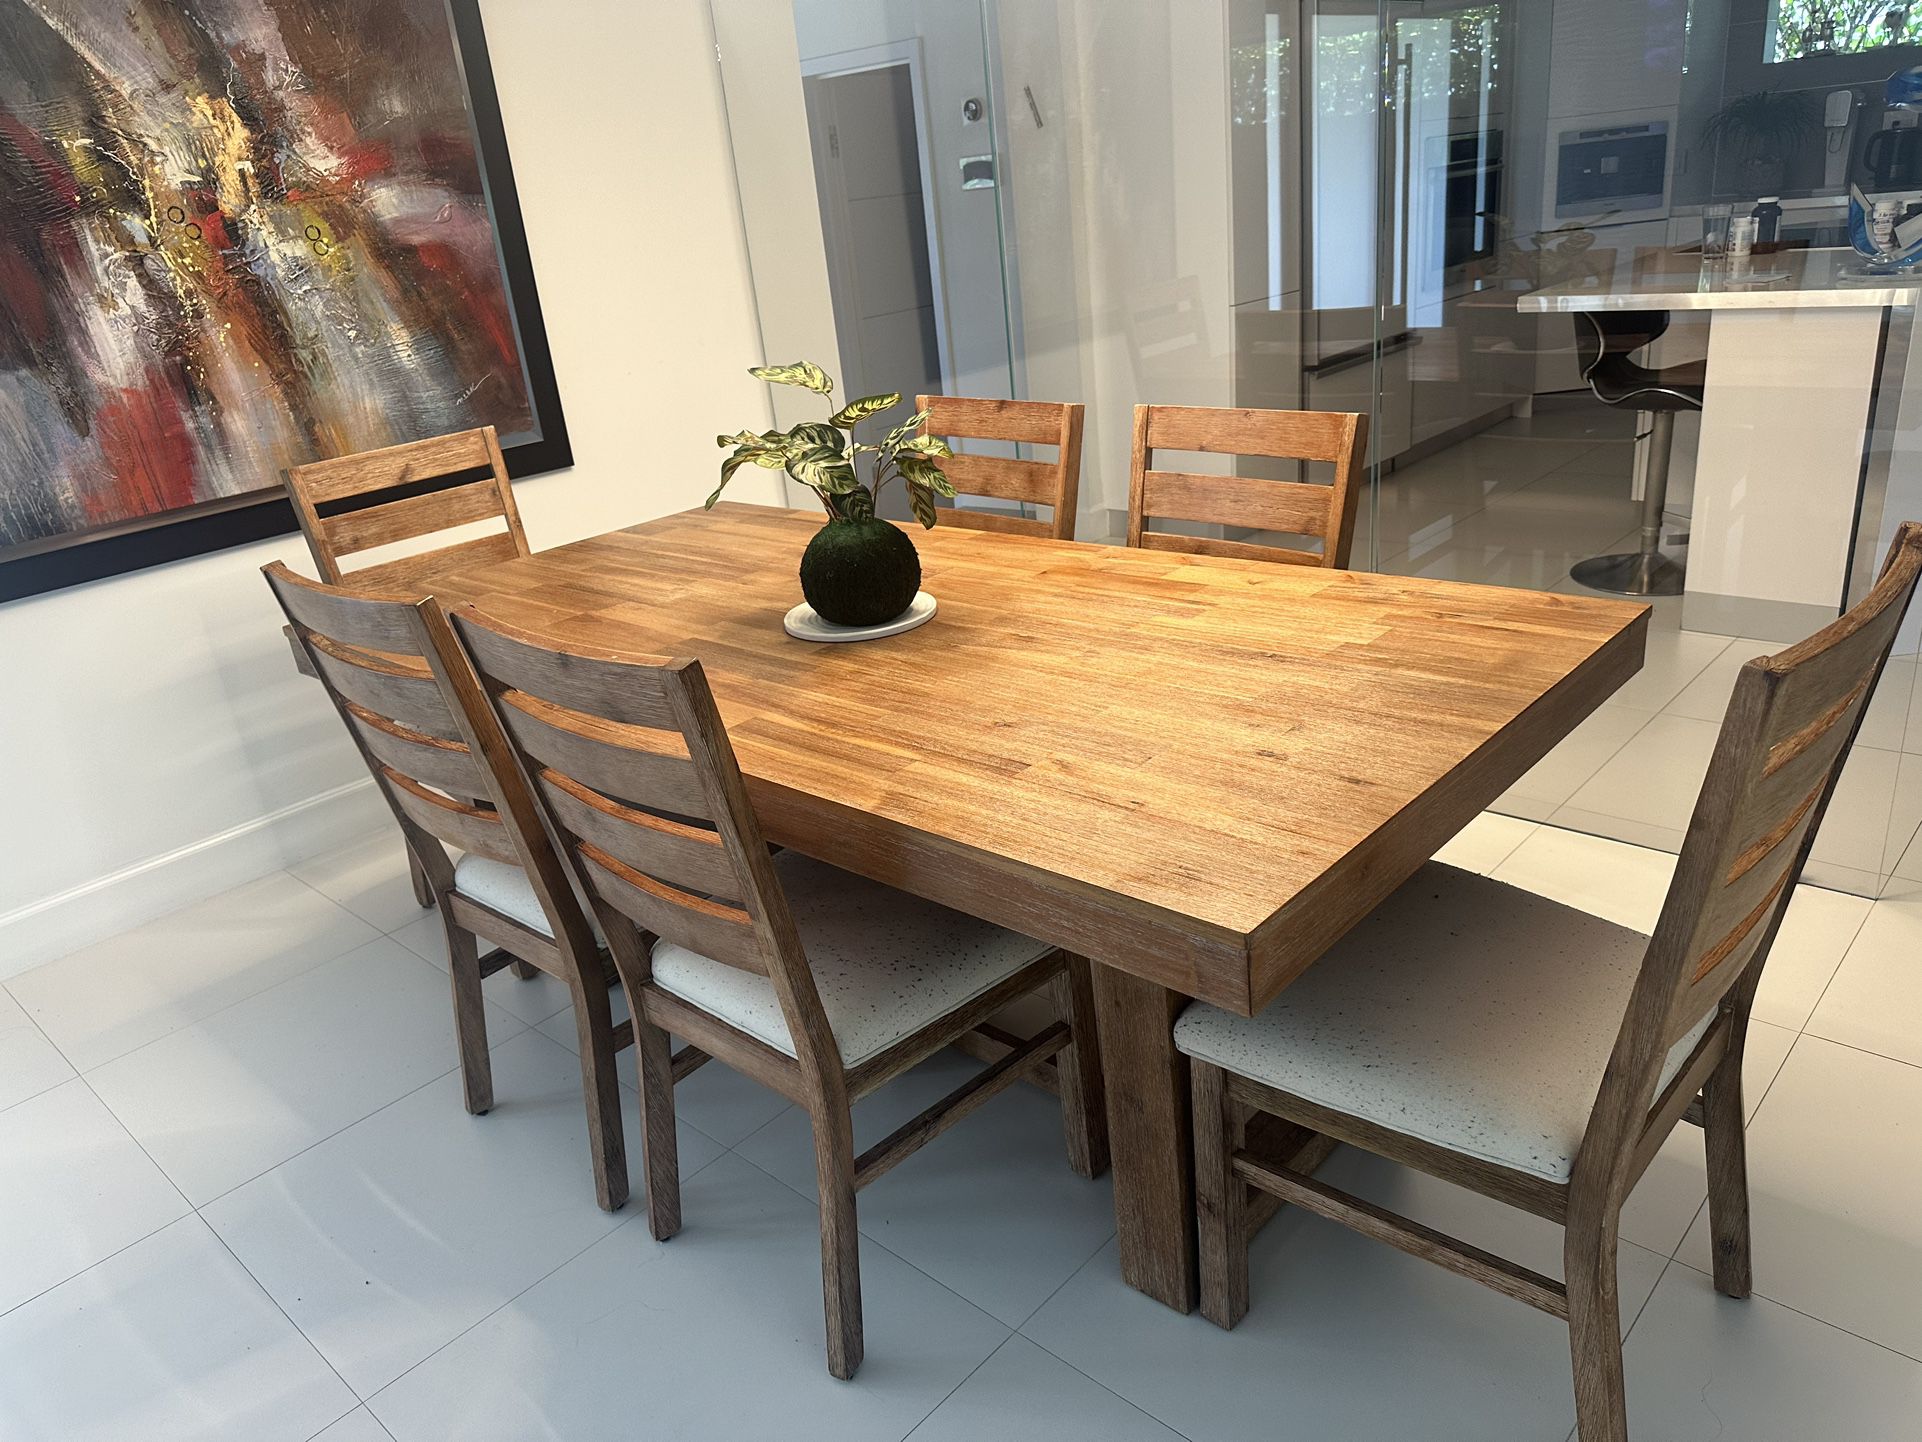 Beautiful, elegant, wooden dining table and 6 chairs